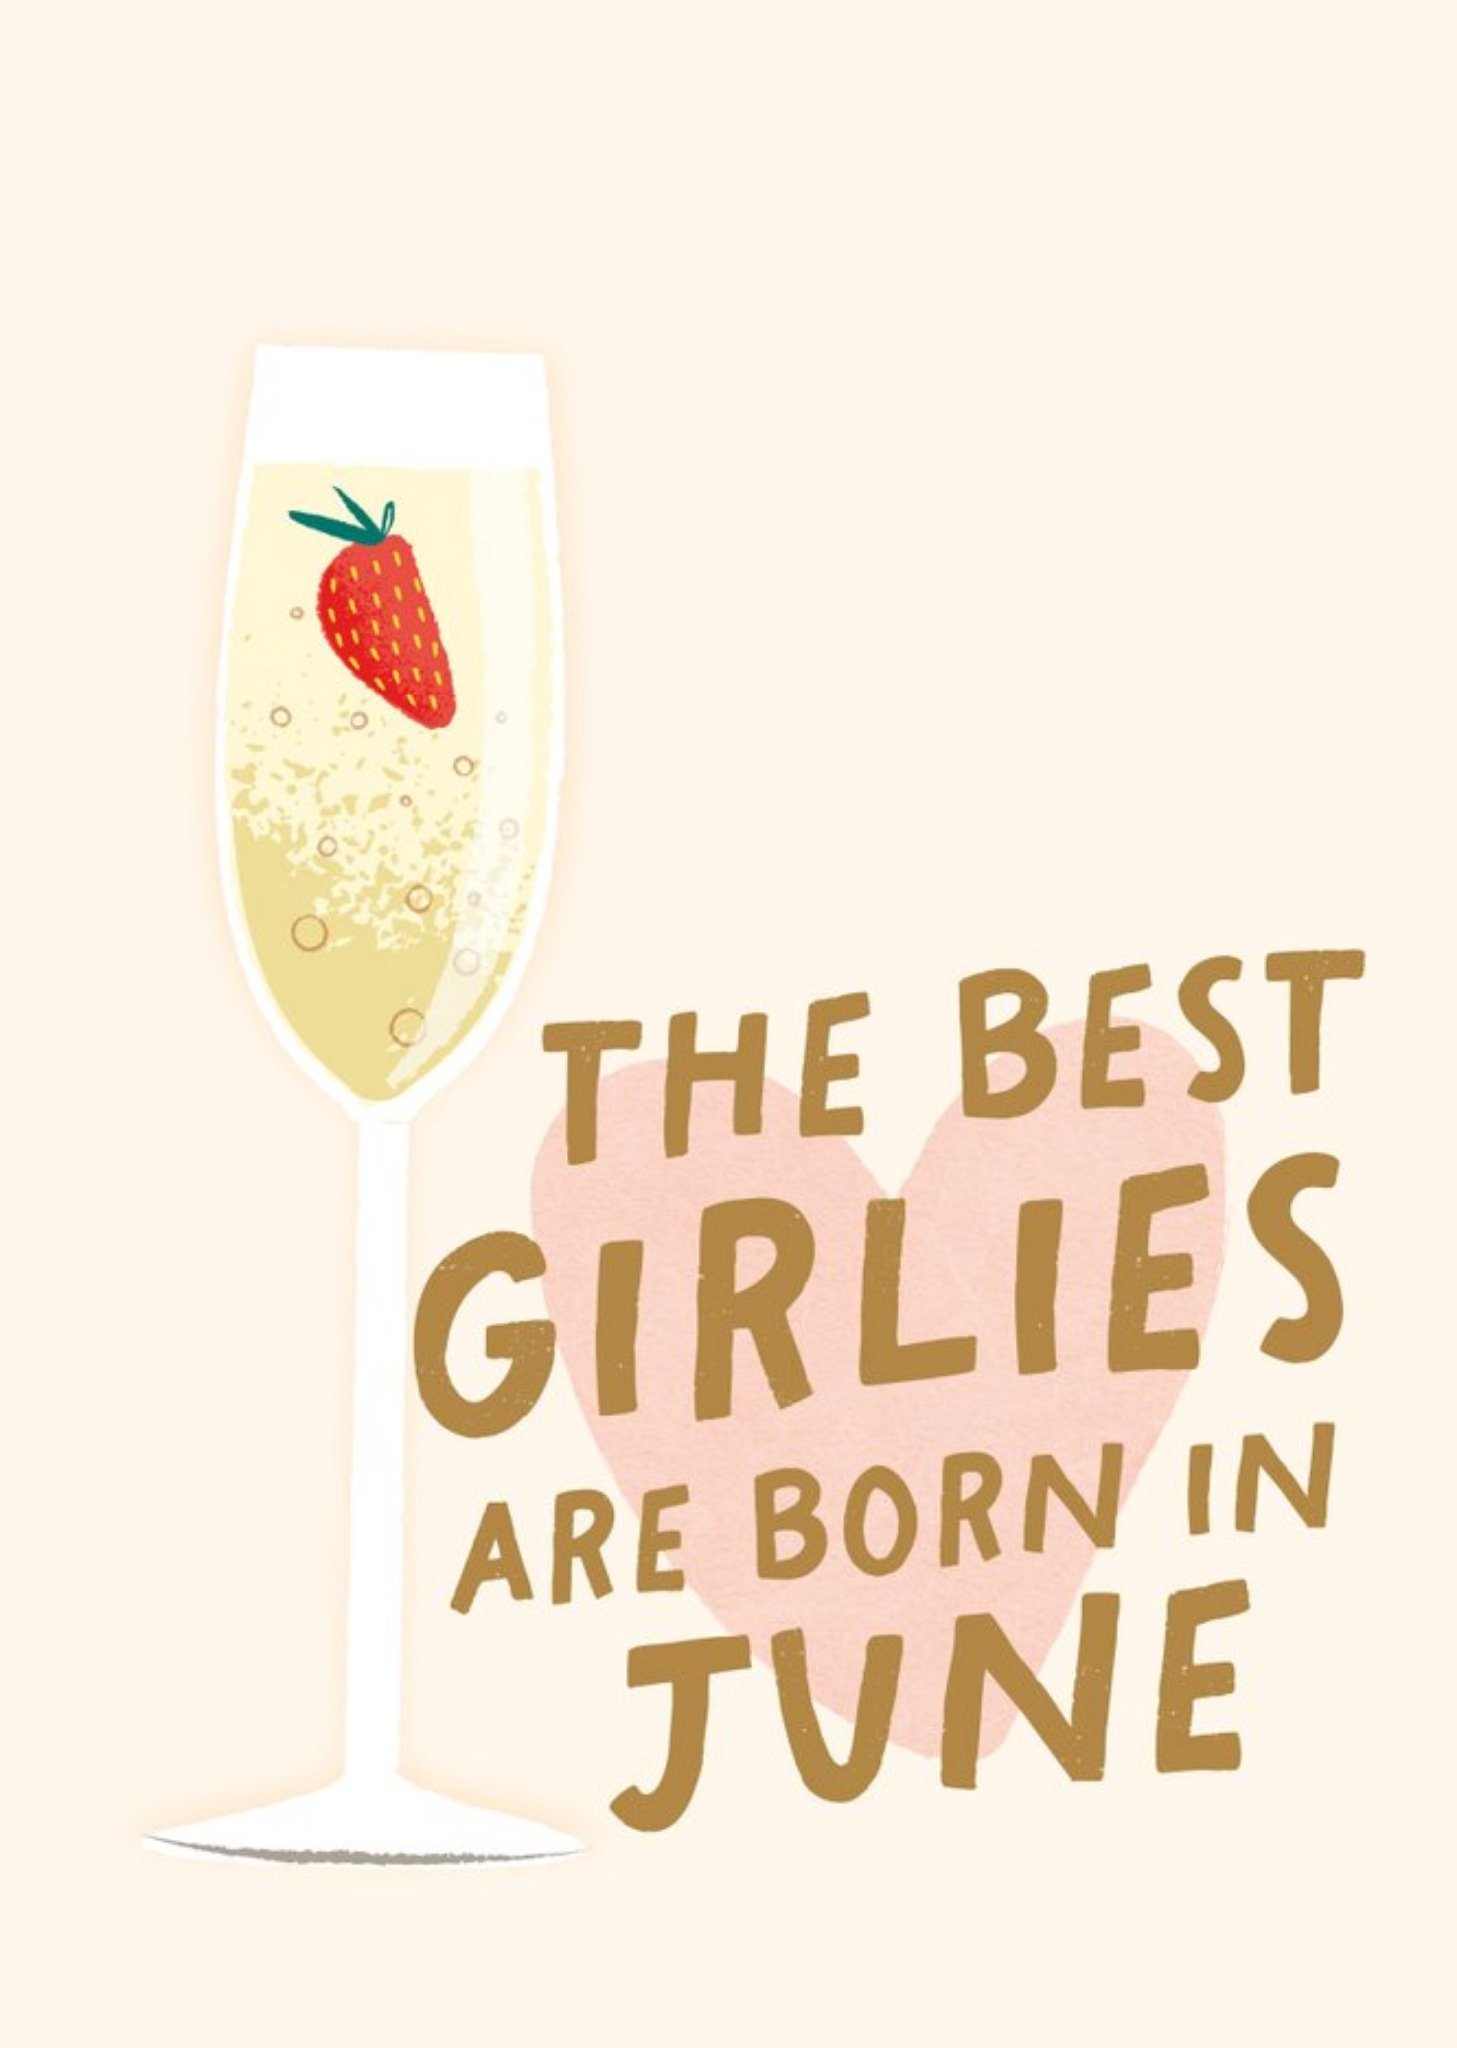 The London Studio Illustration Of A Glass Of Wine The Best Girlies Are Born In June Birthday Card, L